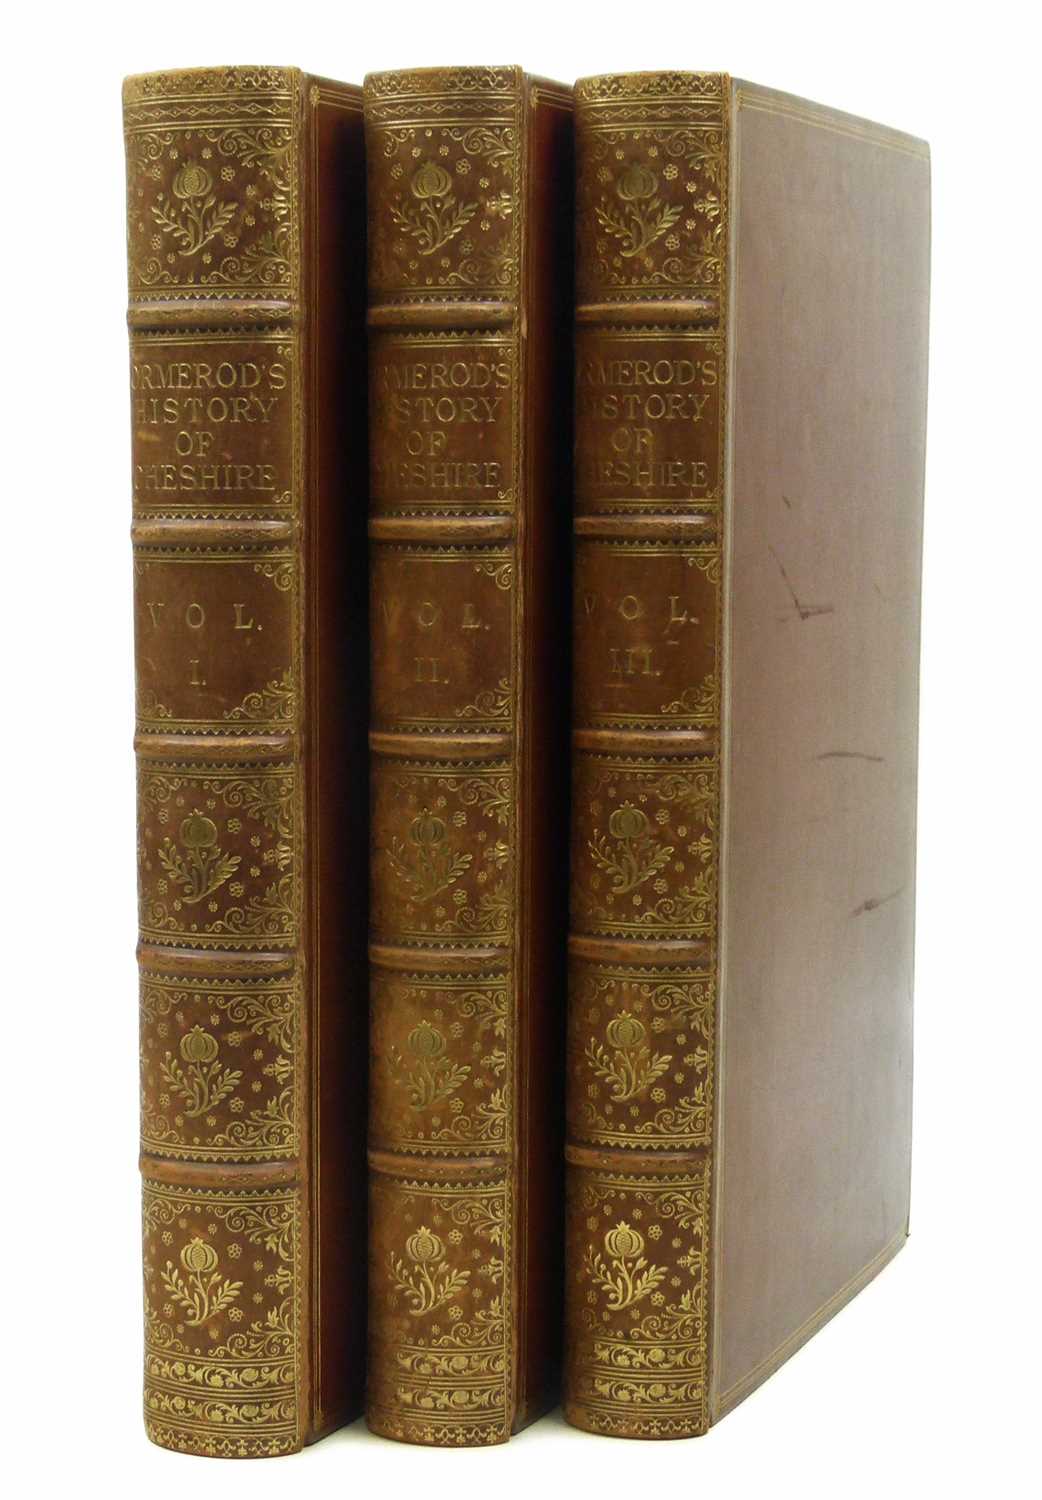 Lot 58 - George Ormerod, The History of the County Palatine and City of Chester, 1819